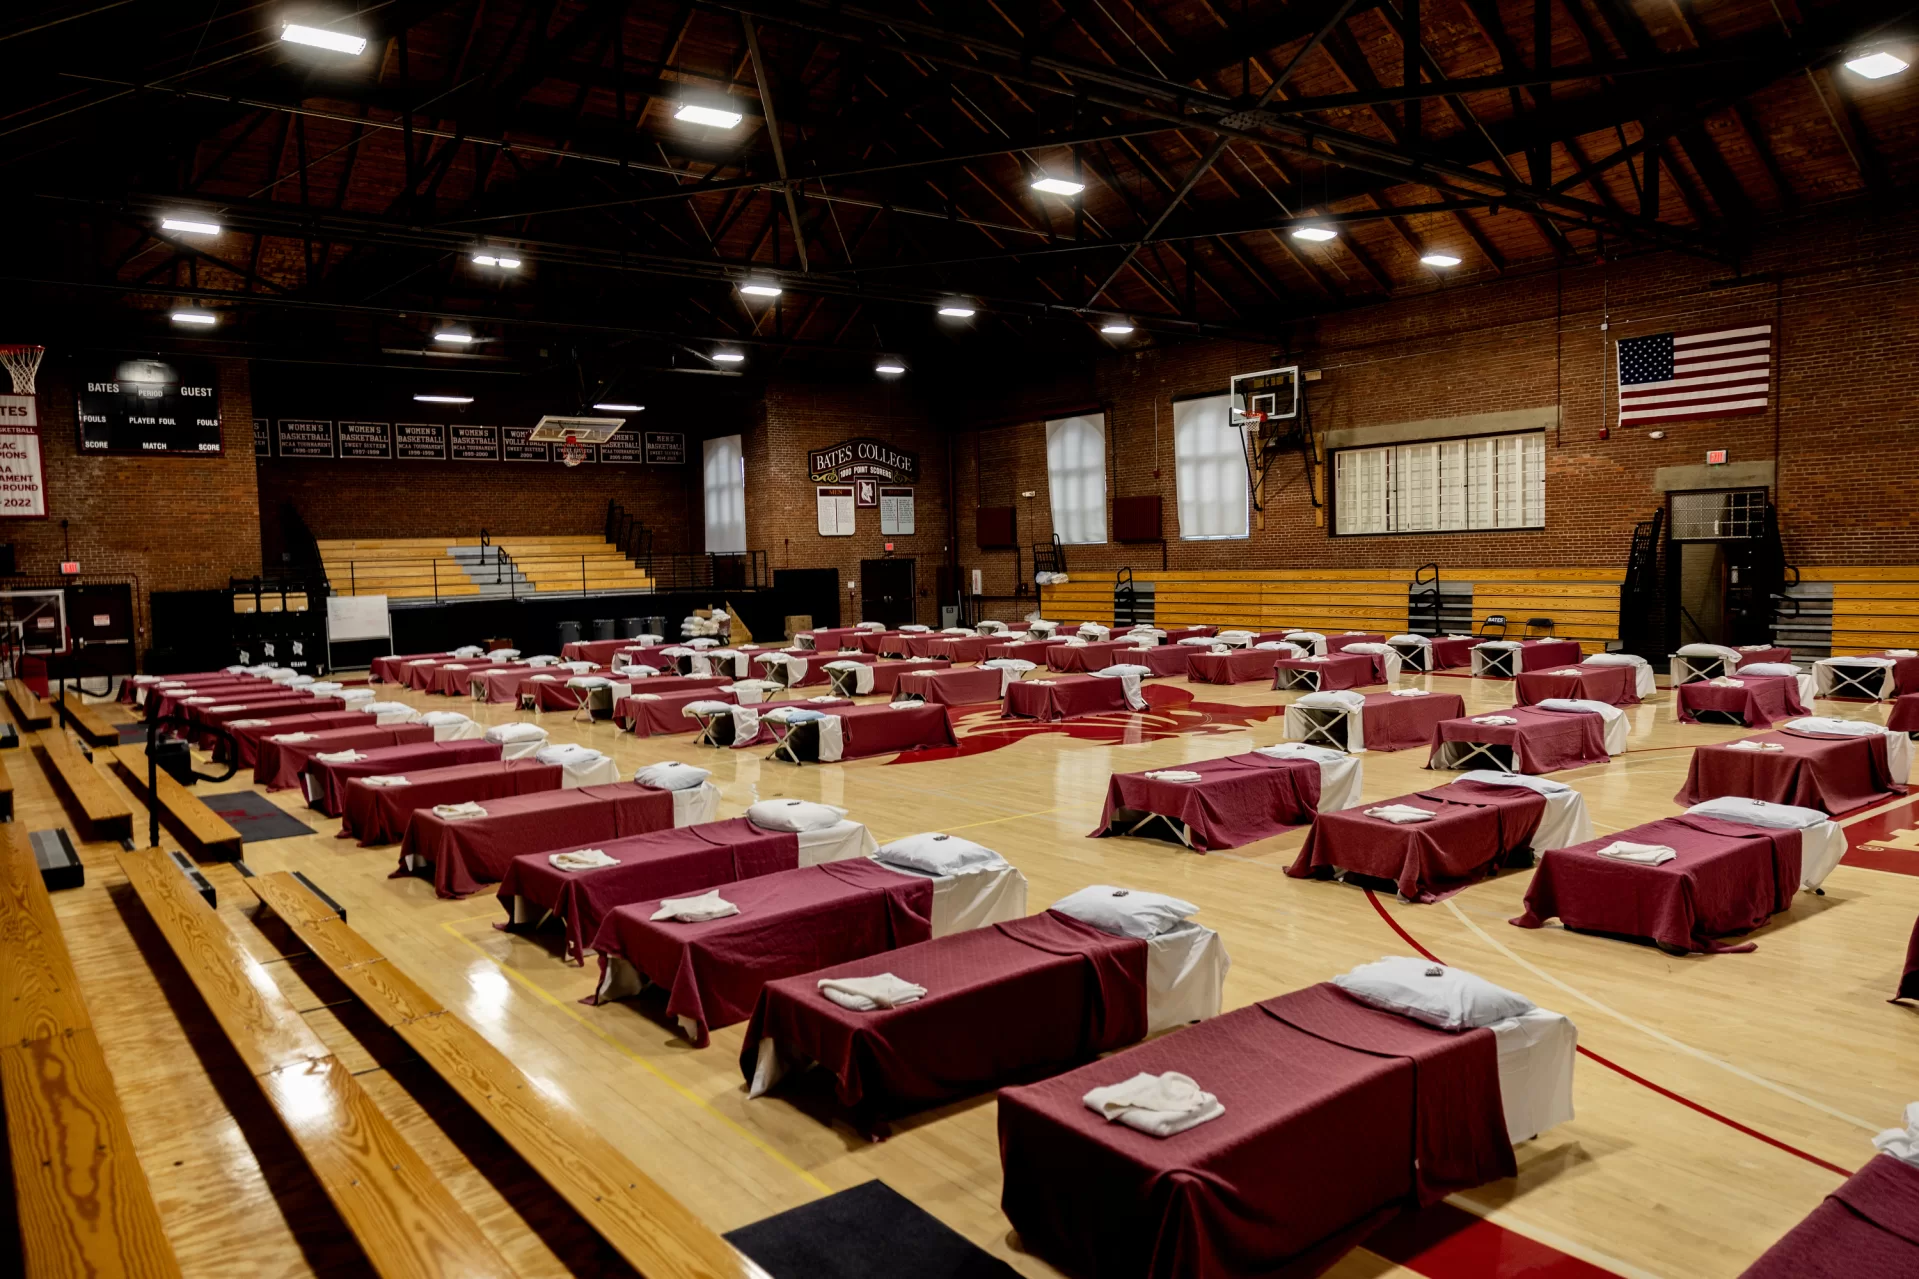 With eclipse tourism making local lodging scarce, Bates quickly opened Alumni Gym and Commons on Friday to help house and feed some of the 1,000 utility crews who’ve traveled to Maine to support power restoration efforts in the wake of the major snowstorm that cut power to hundreds of thousands of Mainers. By Friday afternoon, 75 beds (provided by the Maine Emergency Management Agency) were all made up in the gym — each with a Bates chocolate on the pillow. The Bates chocolates are a greeting, said Christine Schwartz, associate vice president for dining, conferences, and campus events. “They’re a symbol of welcome and thank you from Bates for the work that is being done.” The work to open Bates to the crews was also supported by Bates Facility Services.